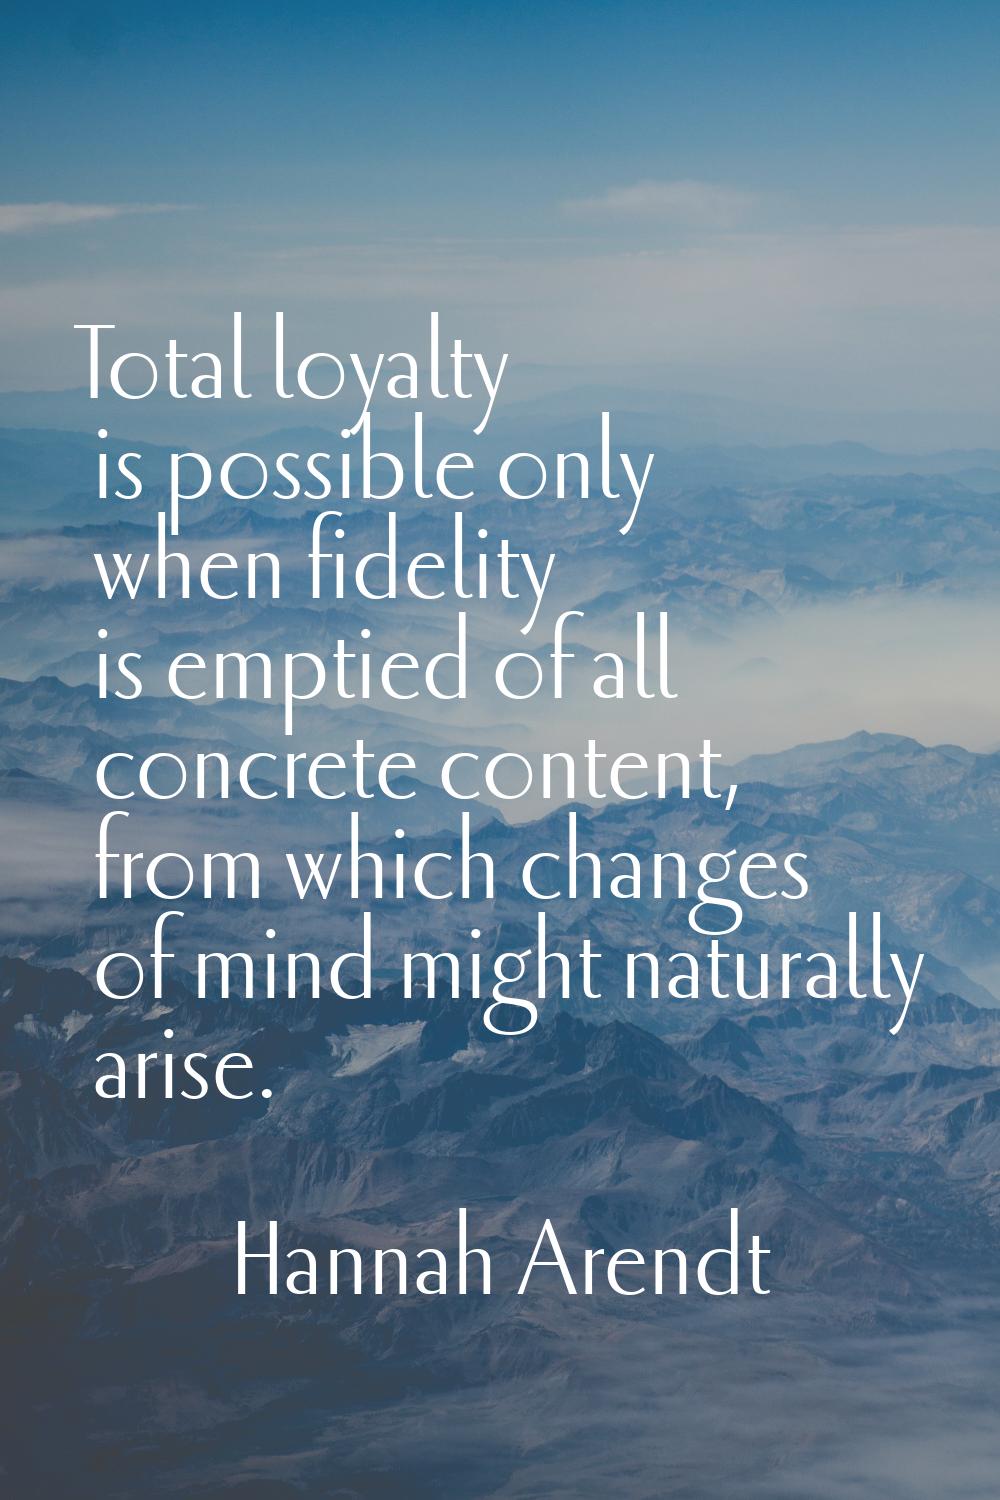 Total loyalty is possible only when fidelity is emptied of all concrete content, from which changes